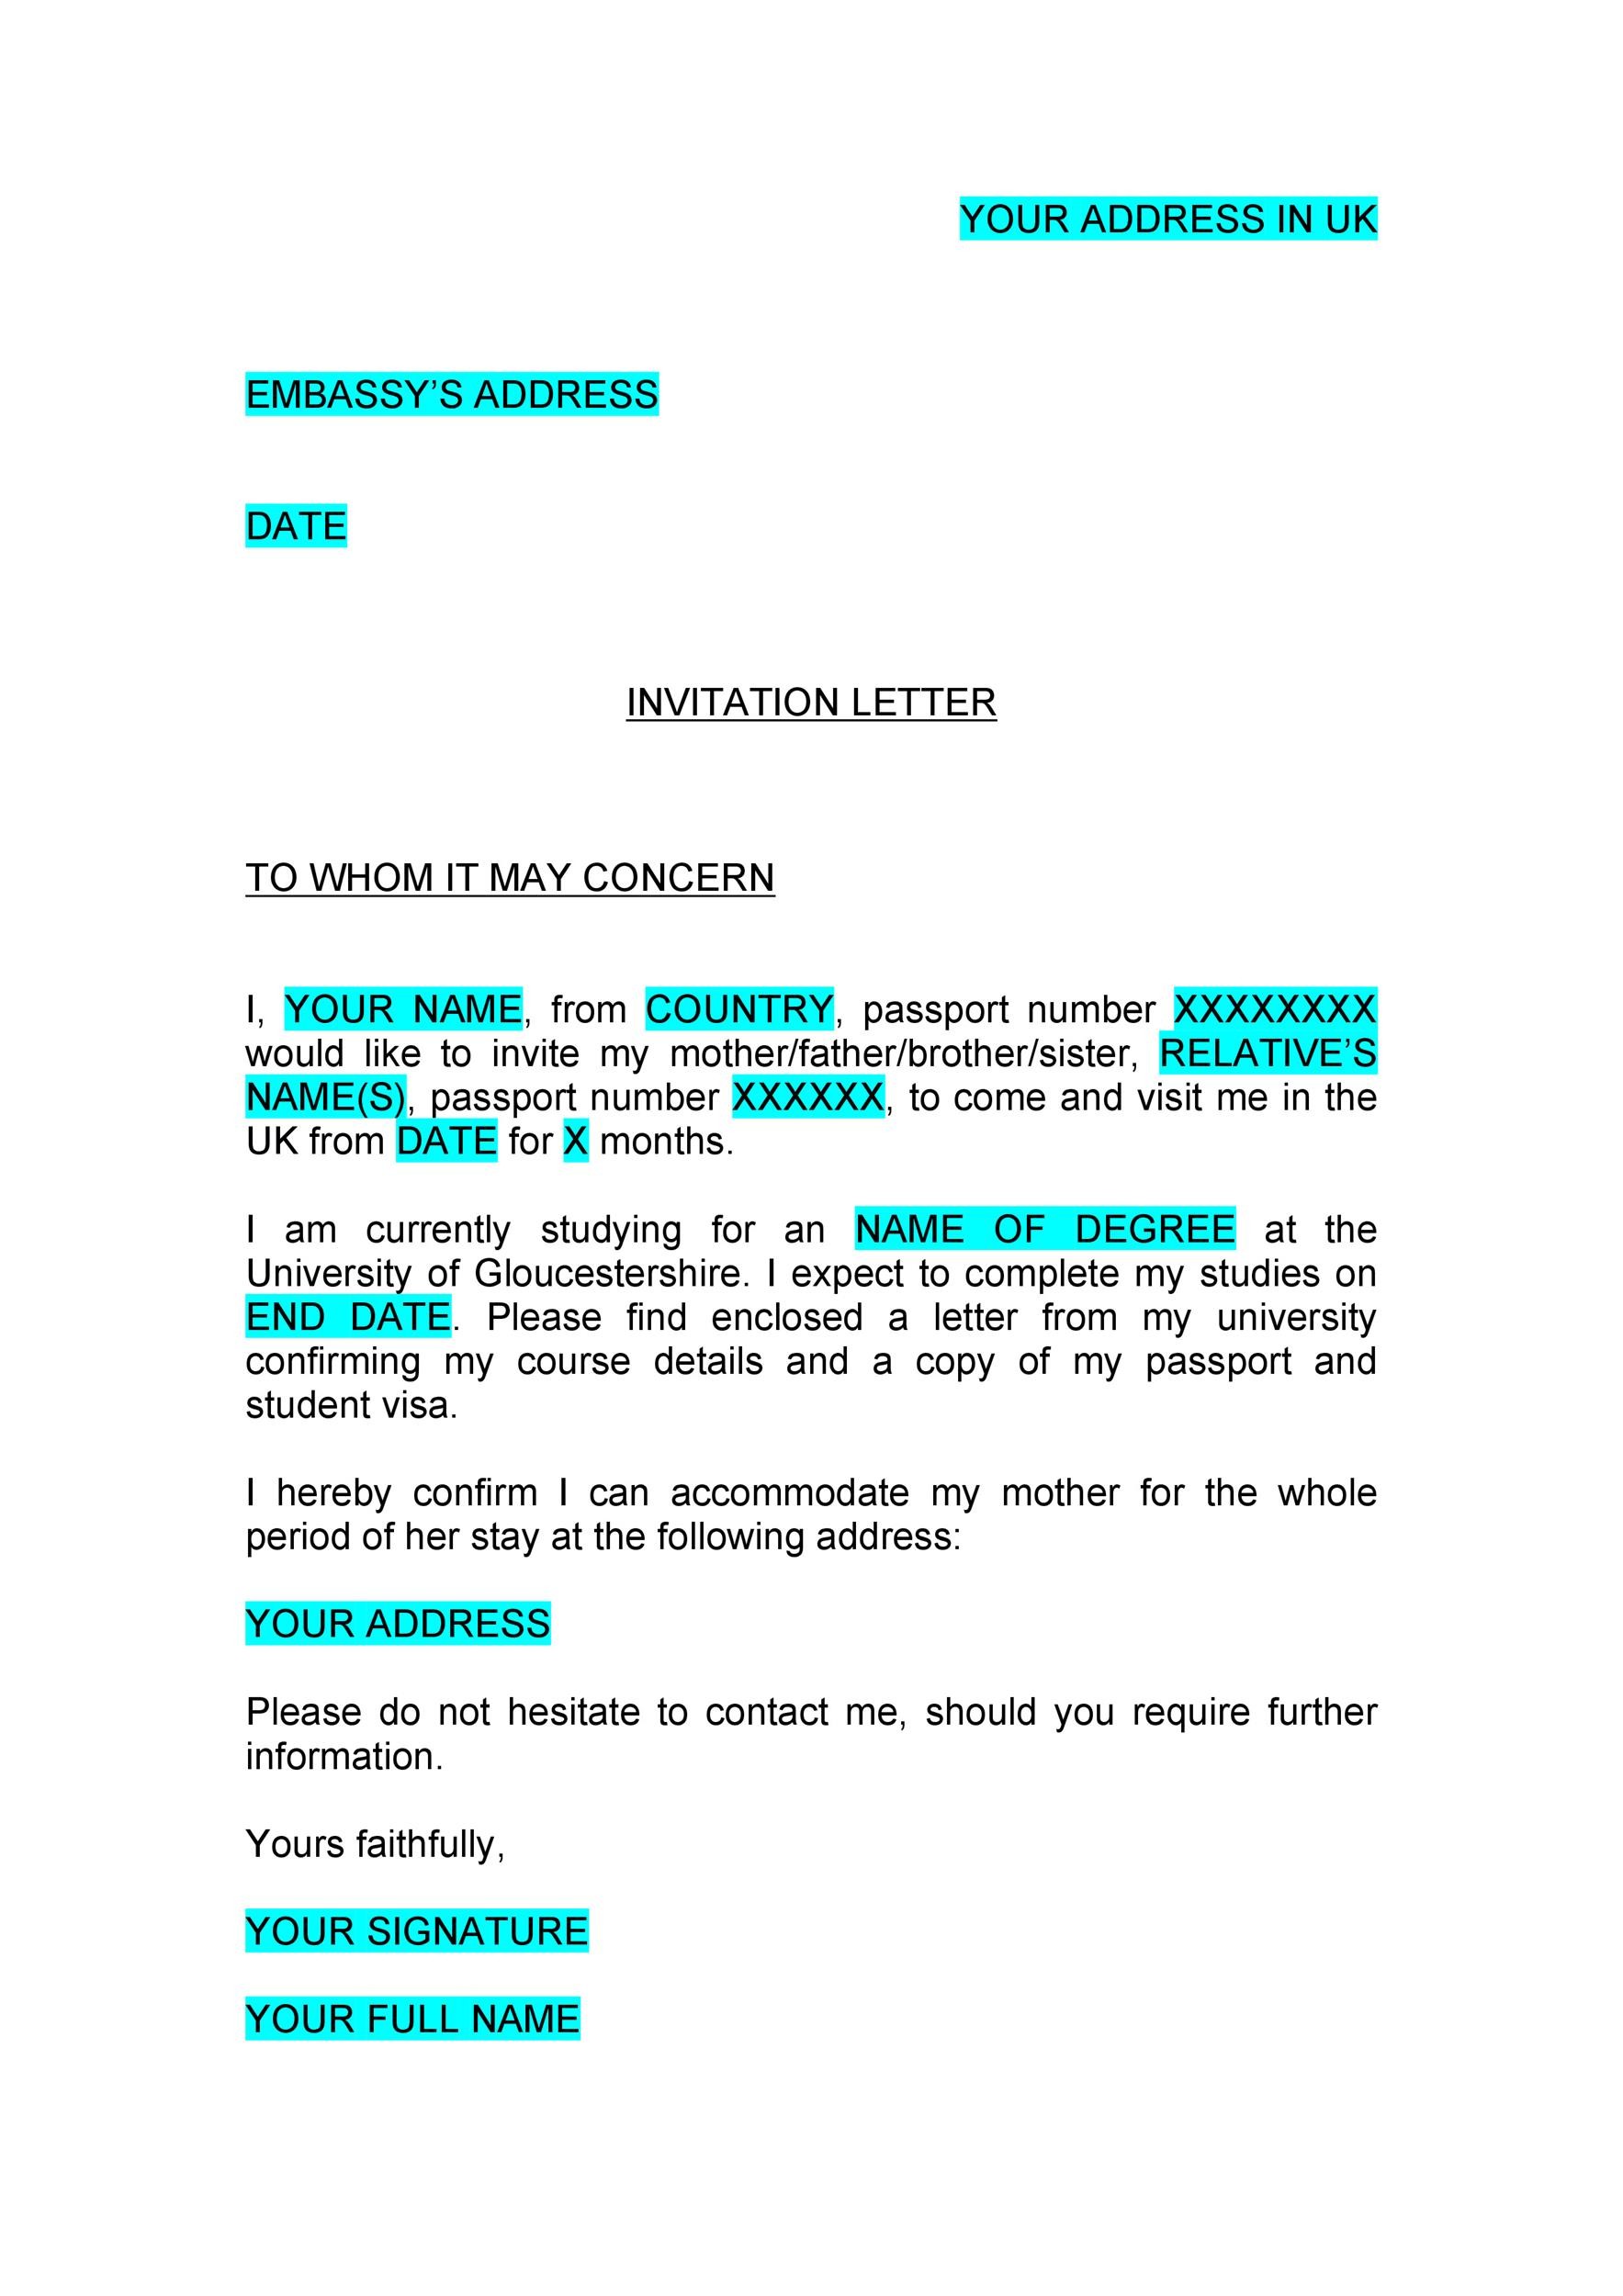 50 To Whom It May Concern Letter Email Templates ᐅ TemplateLab